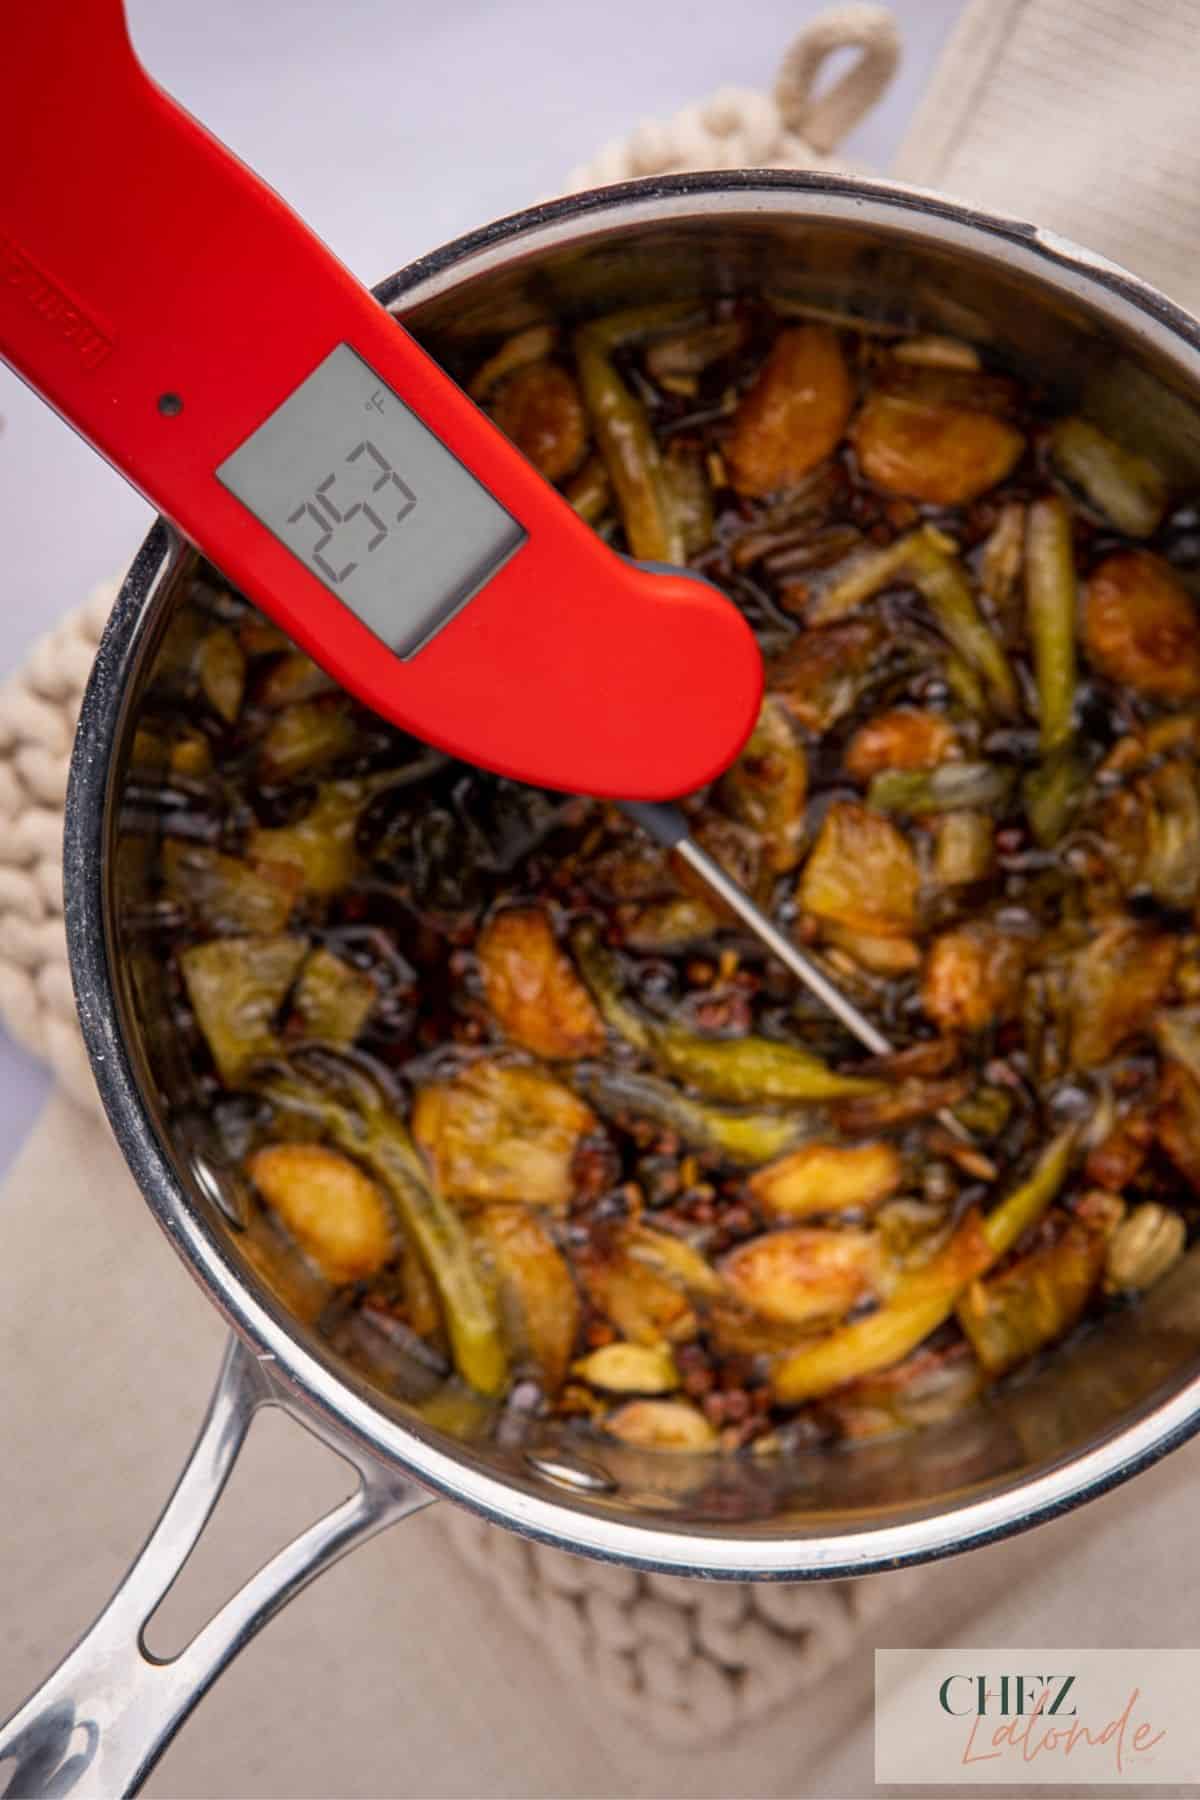 Use a cooking thermometer to check the temperature and lower the heat once it reaches 230 to 250F. 
